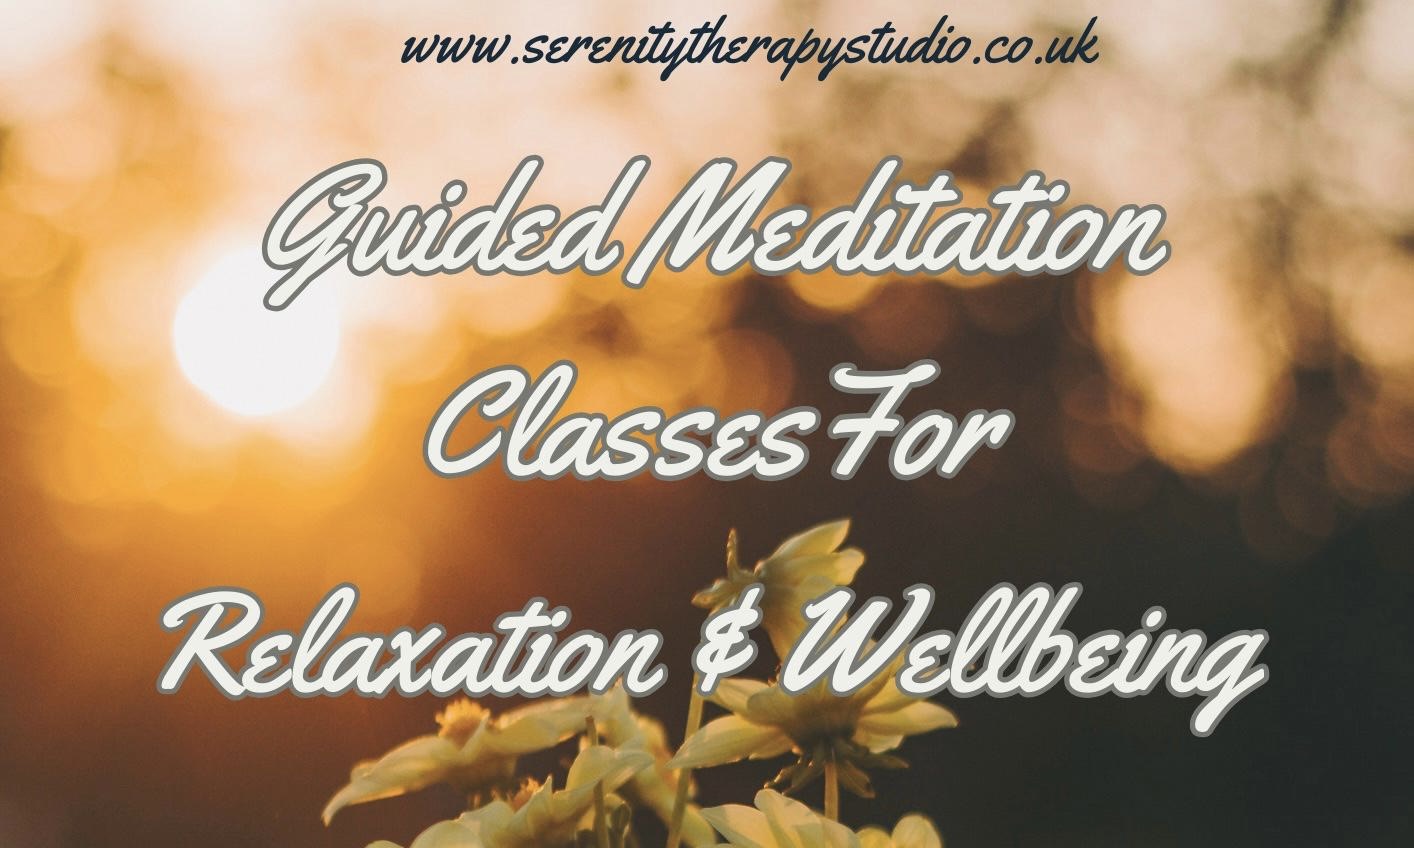 Guided, Meditation Classes For Relaxation & Wellbeing